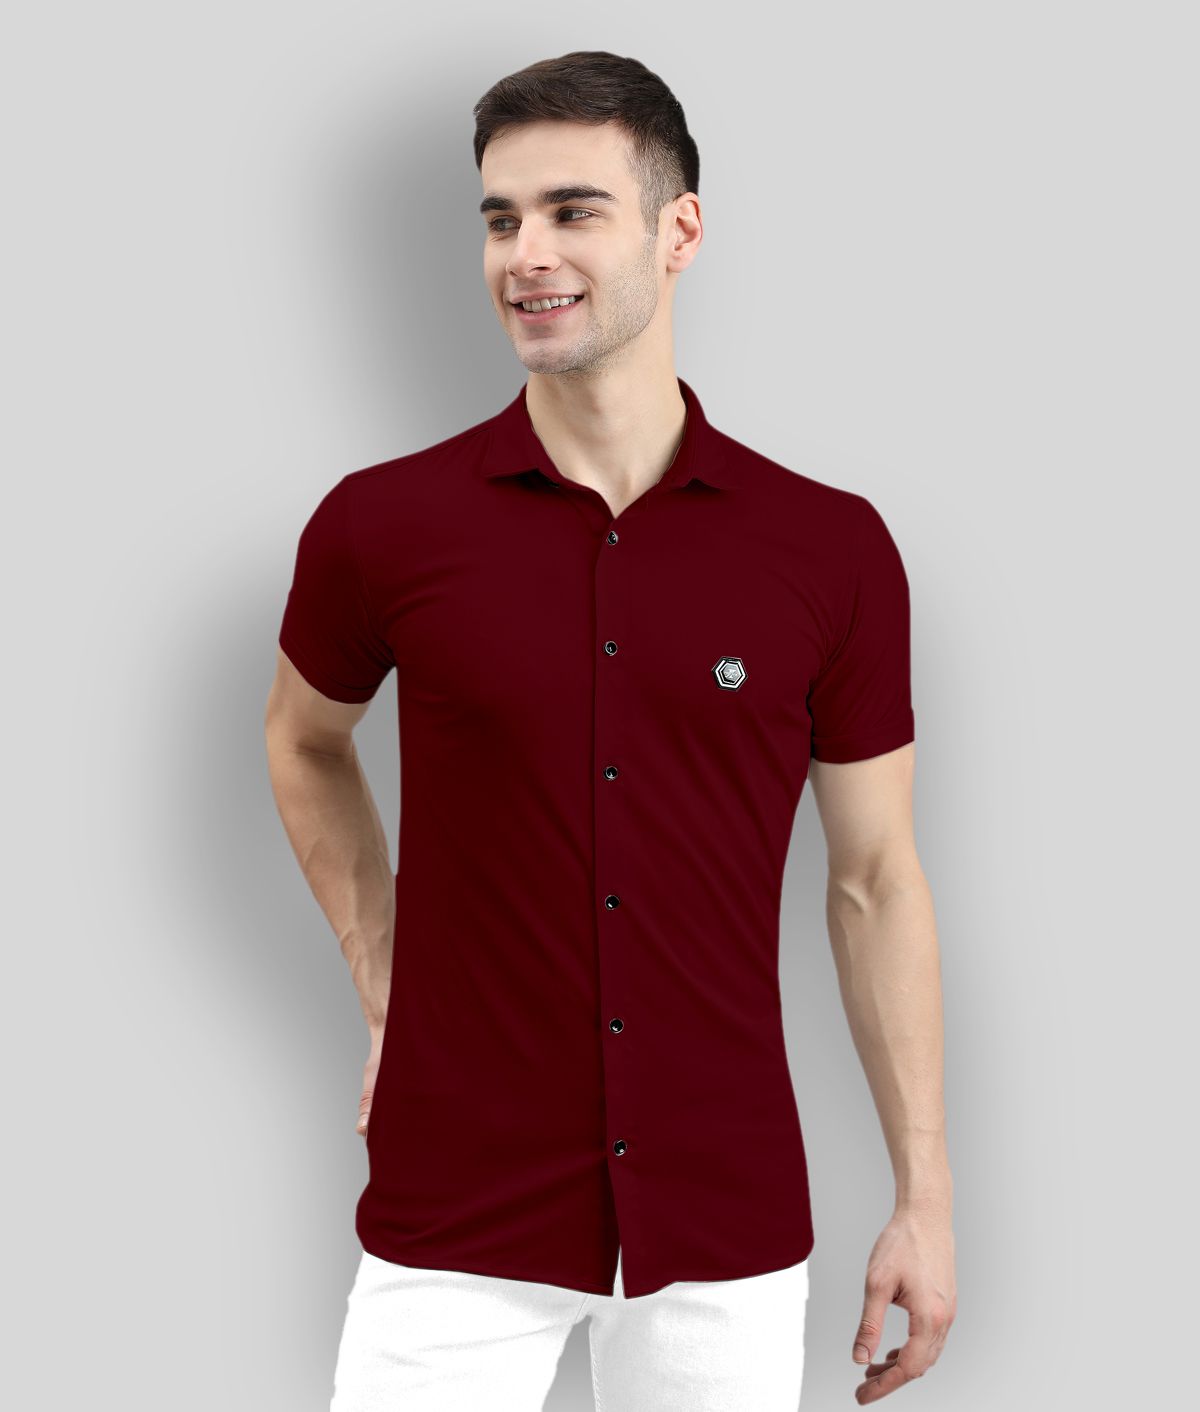 INDICLUB - Maroon Cotton Blend Slim Fit Men's Casual Shirt (Pack of 1)